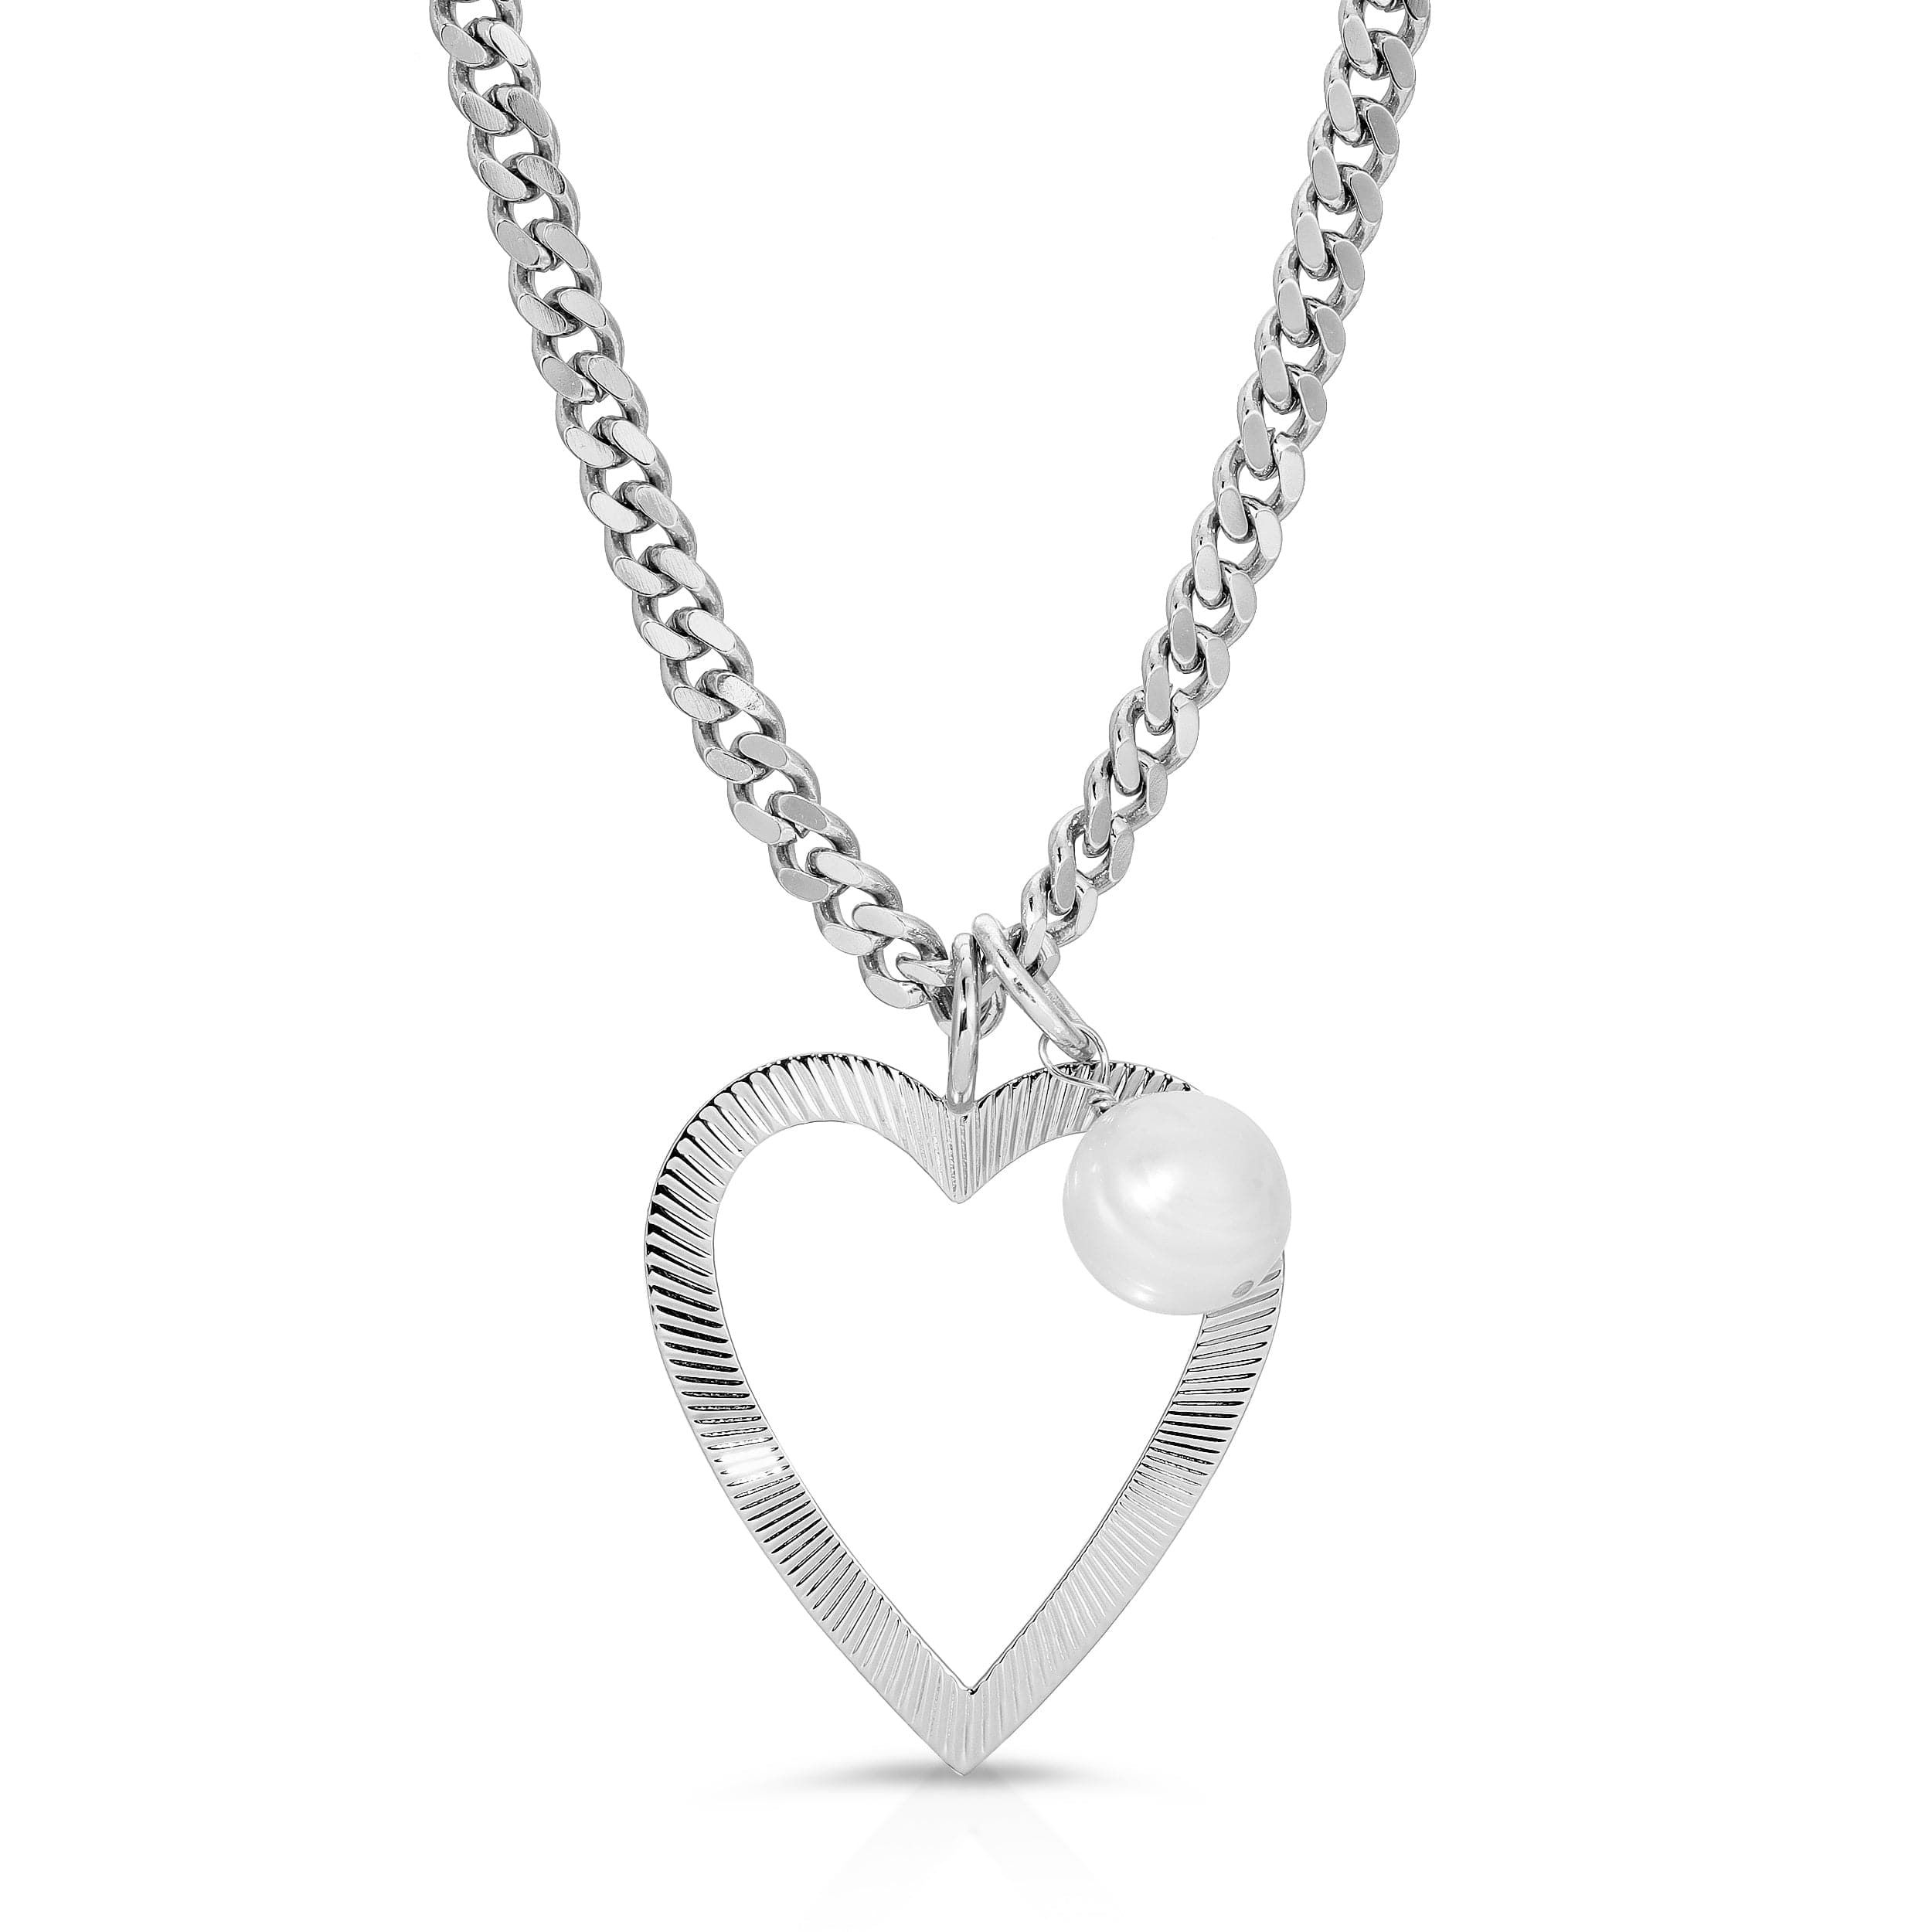 a necklace with a heart shaped pendant on a chain